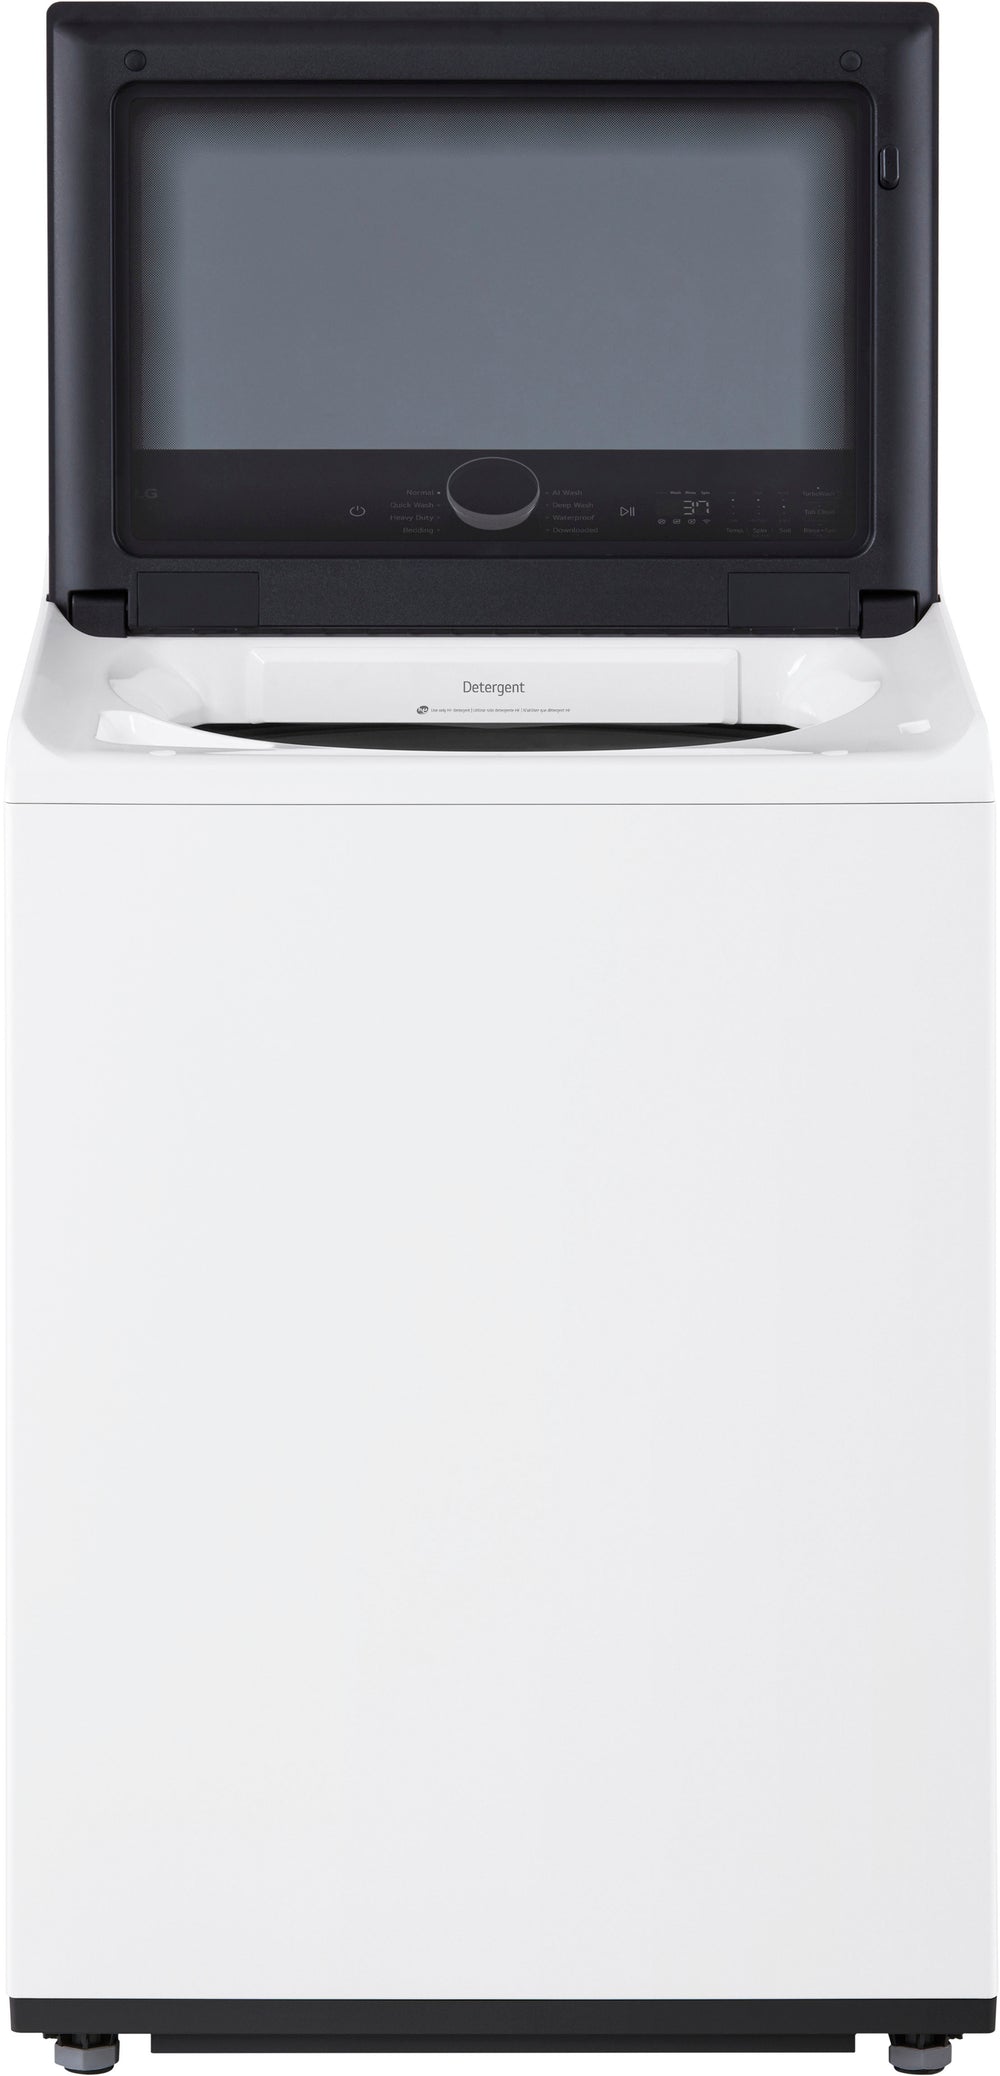 LG - 5.3 Cu. Ft. High Efficiency Smart Top Load Washer with TurboWash3D Technology - Alpine White_1